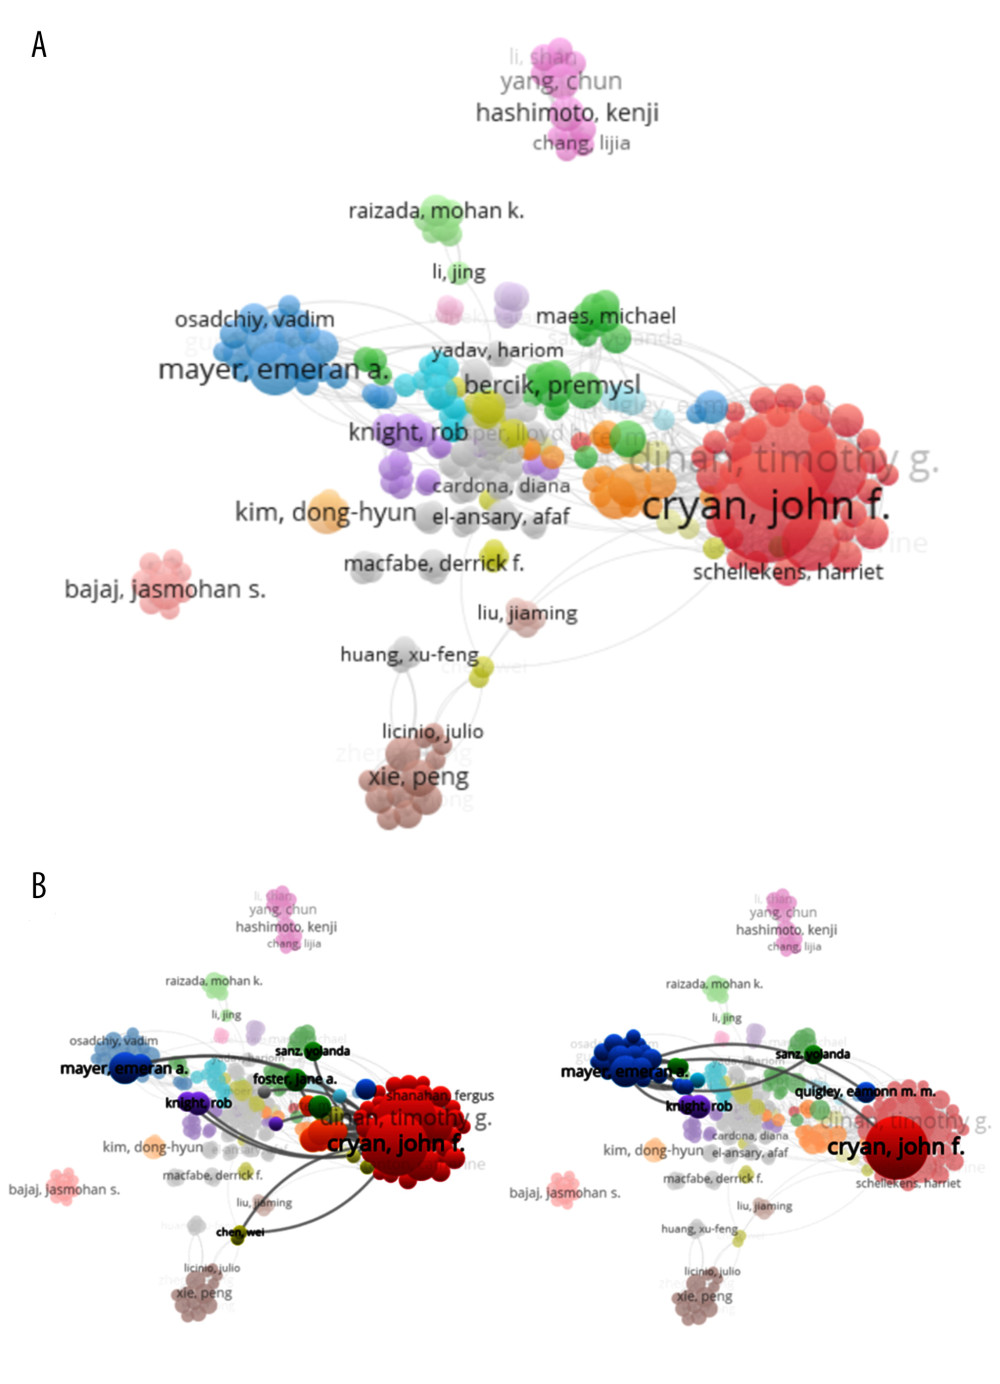 Co-authorship analysis of authors. (A) Map of the cooperation between 338 authors by the VOSviewer. (B) Analysis of the authors who cooperated with John F. Cryan or Emeran A. Mayer. Different colors indicate clusters of collaboration between authors, the size of the circle indicates citations to the publication, and the thickness of the line indicates the size of collaboration. The network visualization was performed by VOSviewer (1.6.15 versions; Centre for Science and Technology Studies, Leiden University, the Netherlands).